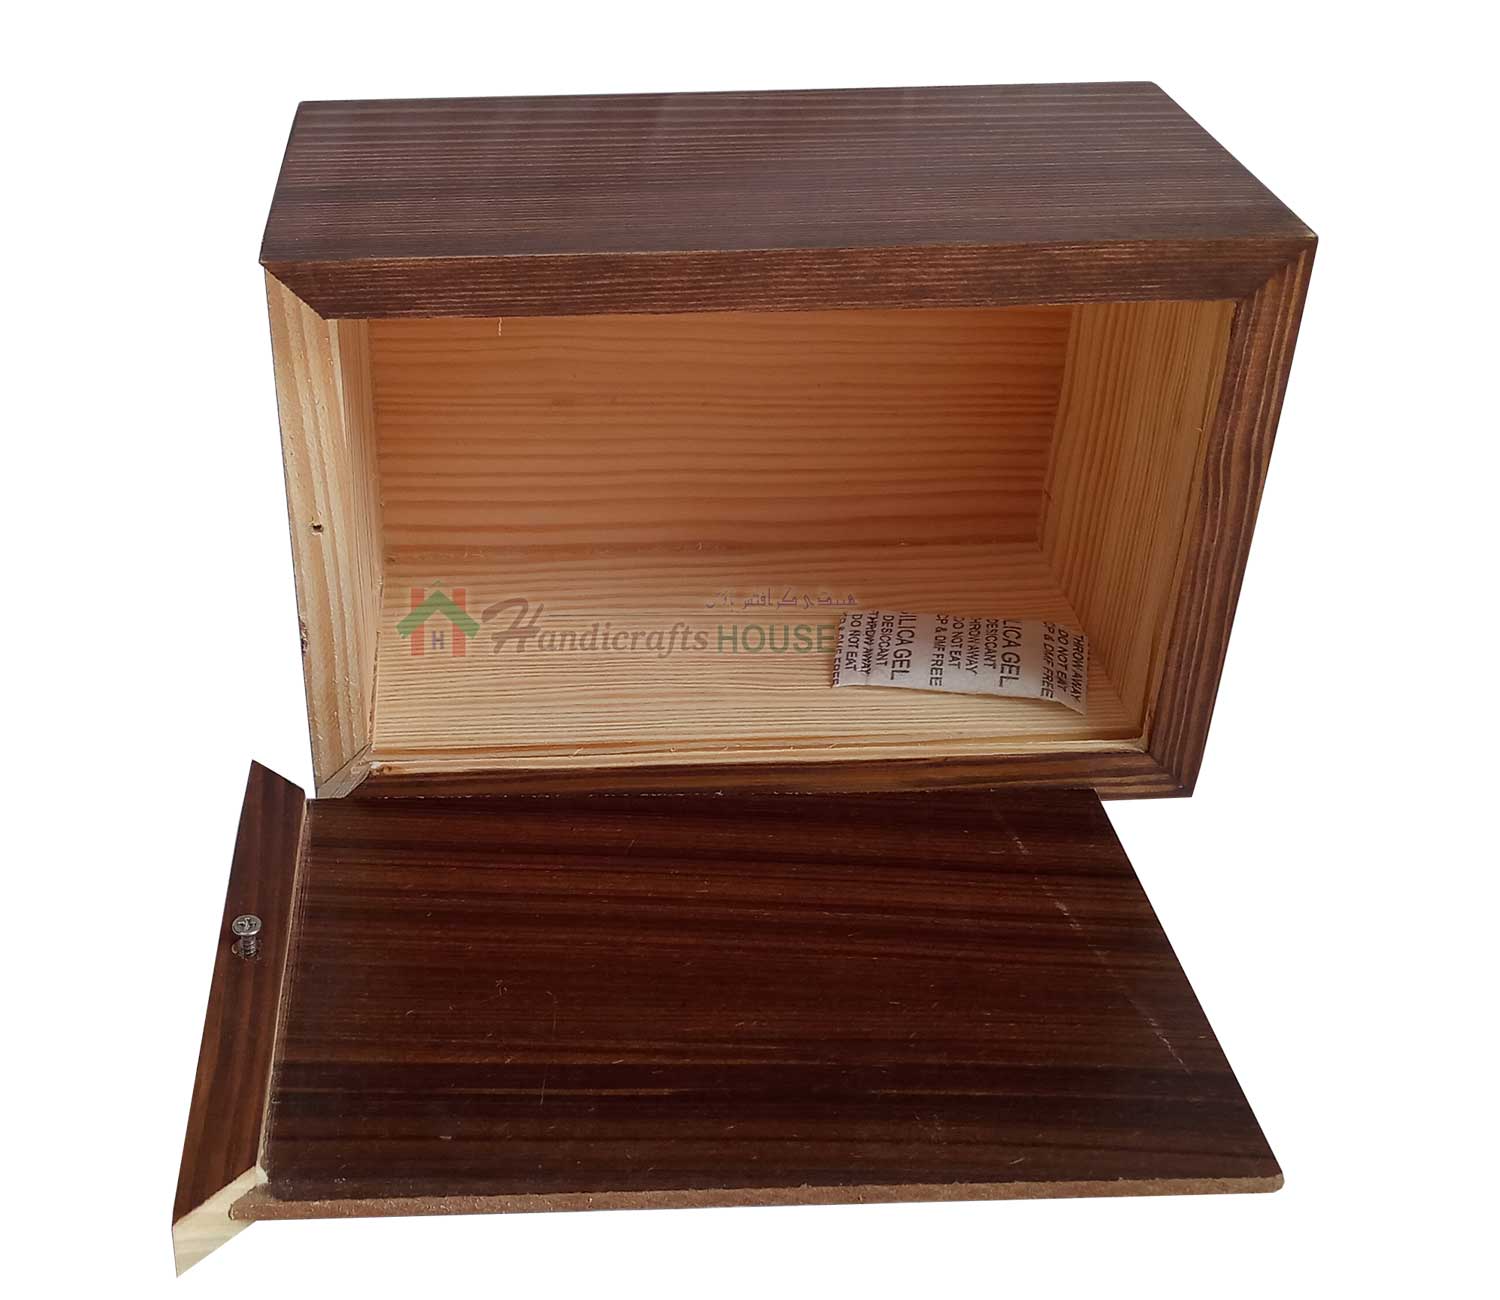 Funeral Ashes Container, Wooden burial Urns For Human, Wood Boxes, Home Decor Urn, Timber Box